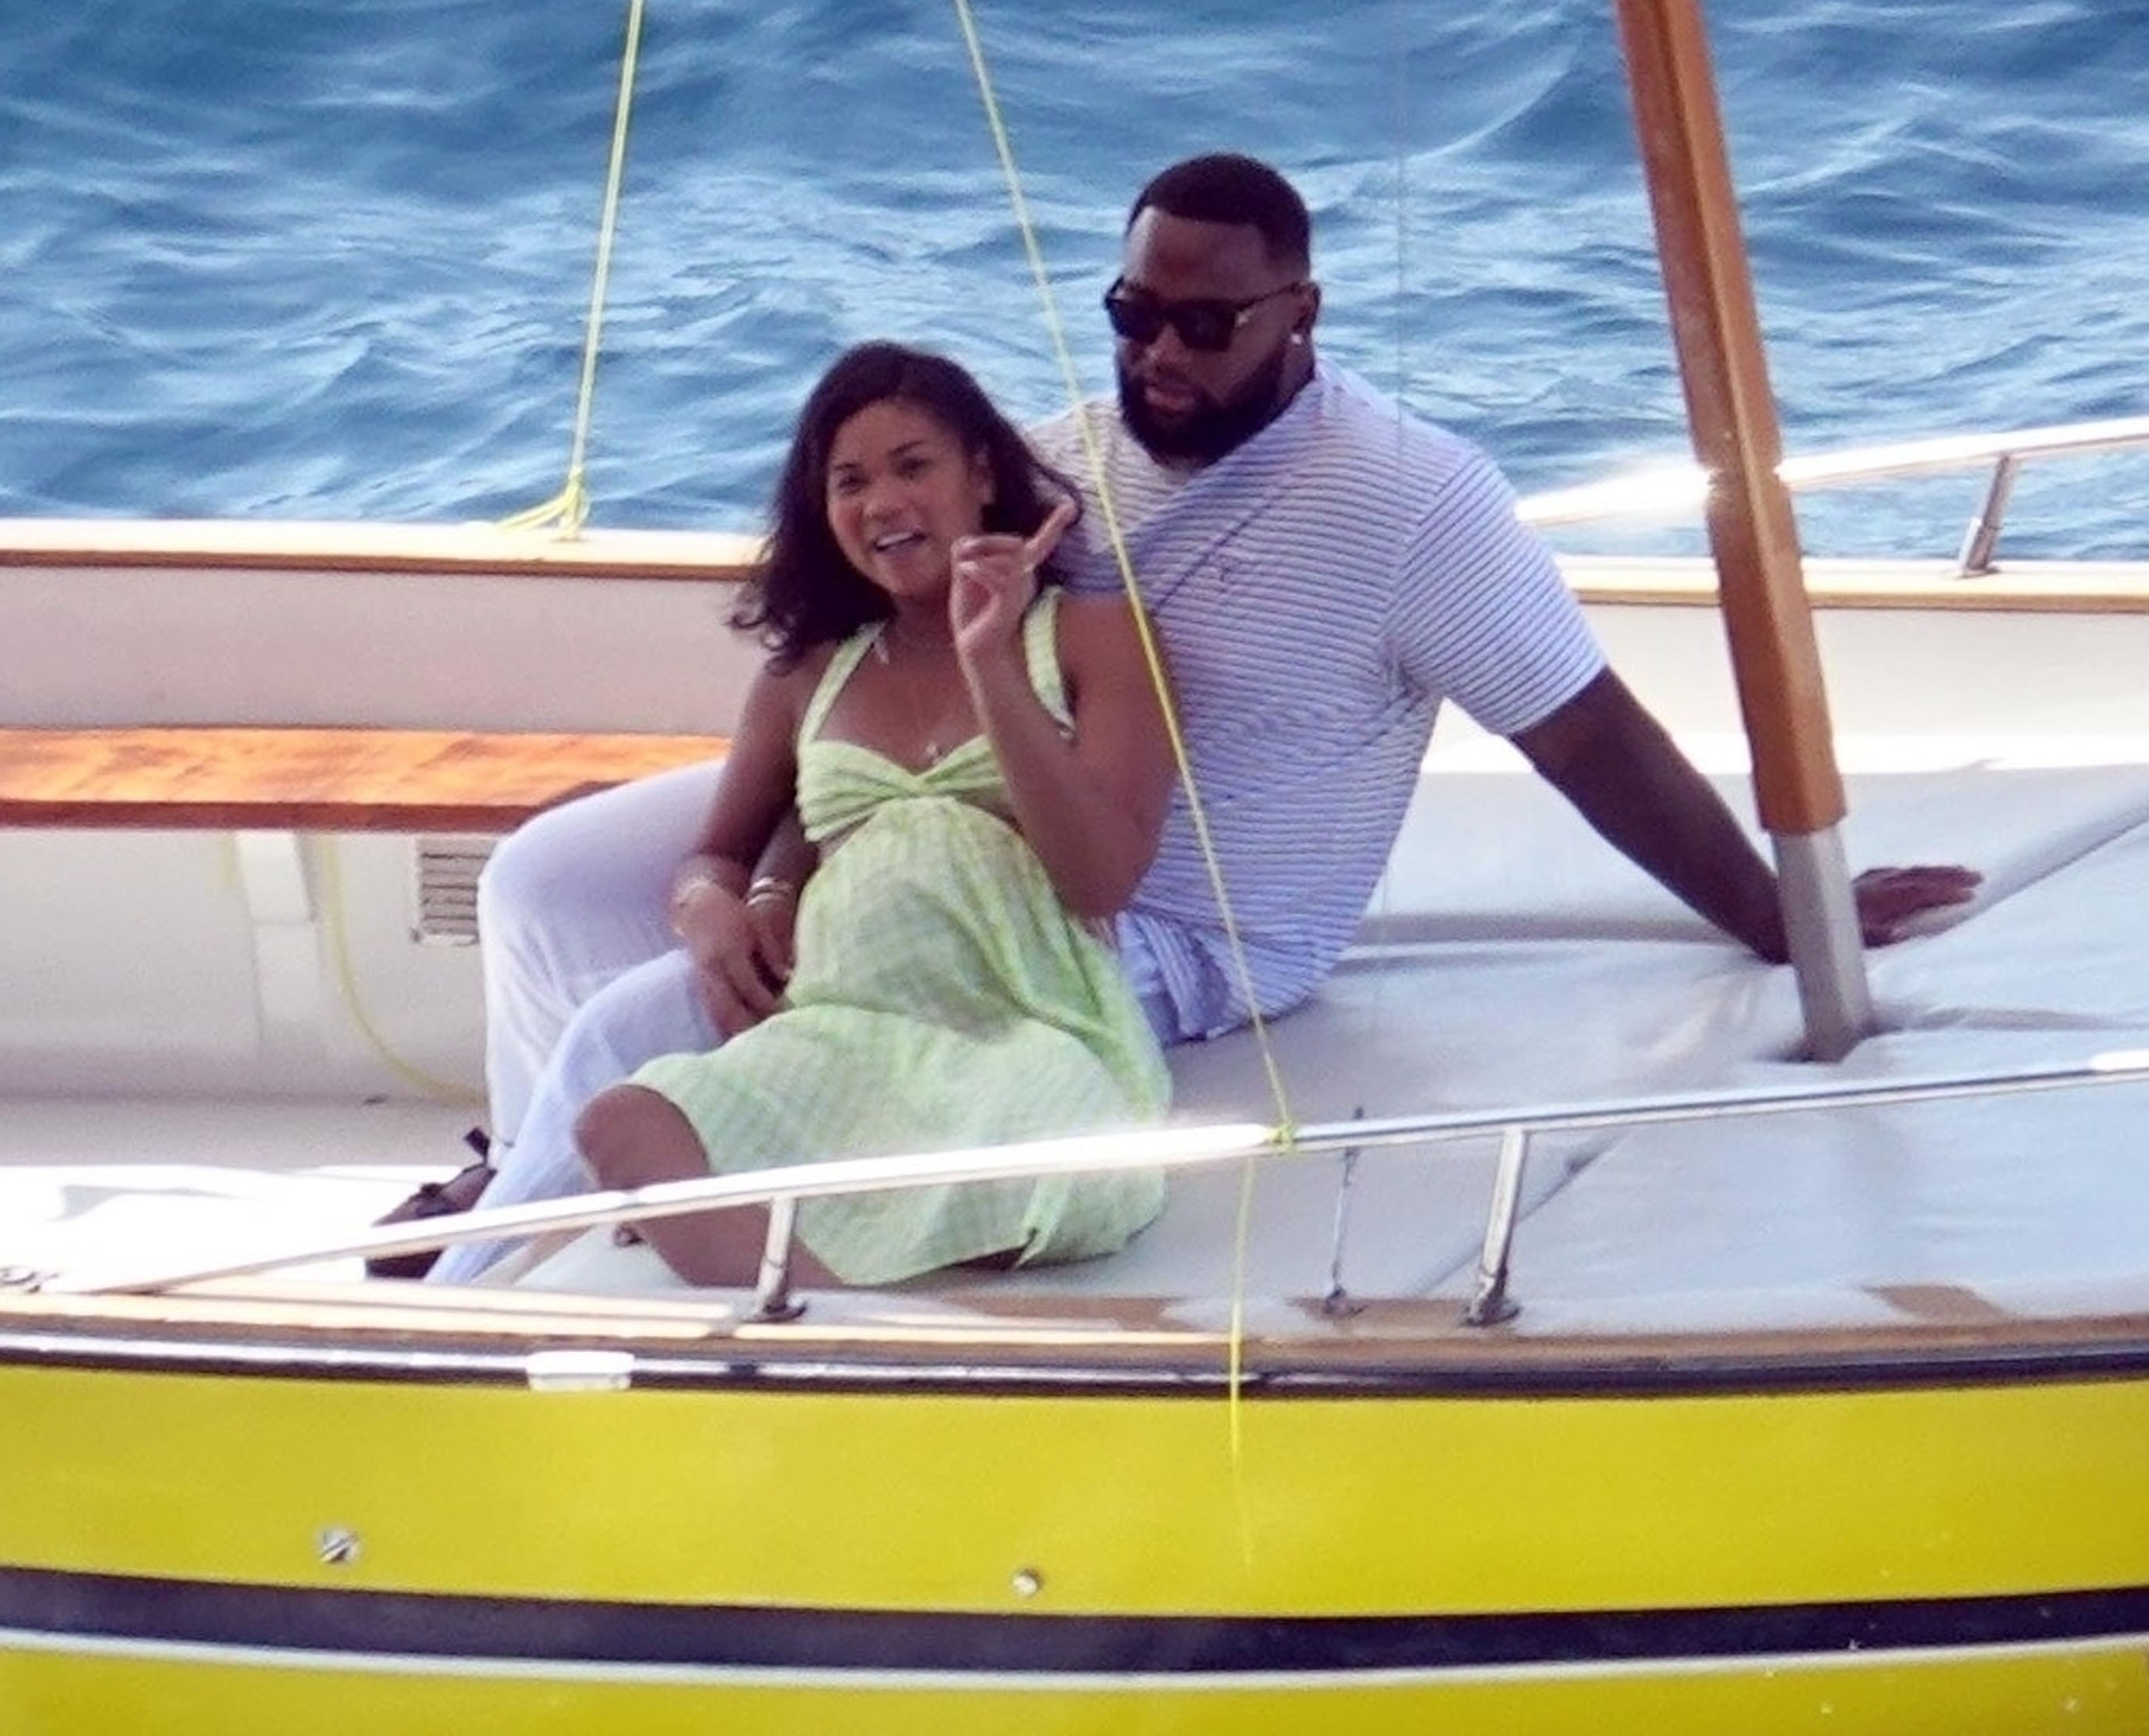 <p>New England Patriots player Davon Godchaux and his pregnant fiancée, model Chanel Iman, enjoyed a romantic boat ride in the Italian sunshine during a vacation in Capri, Italy, on May 28.</p>